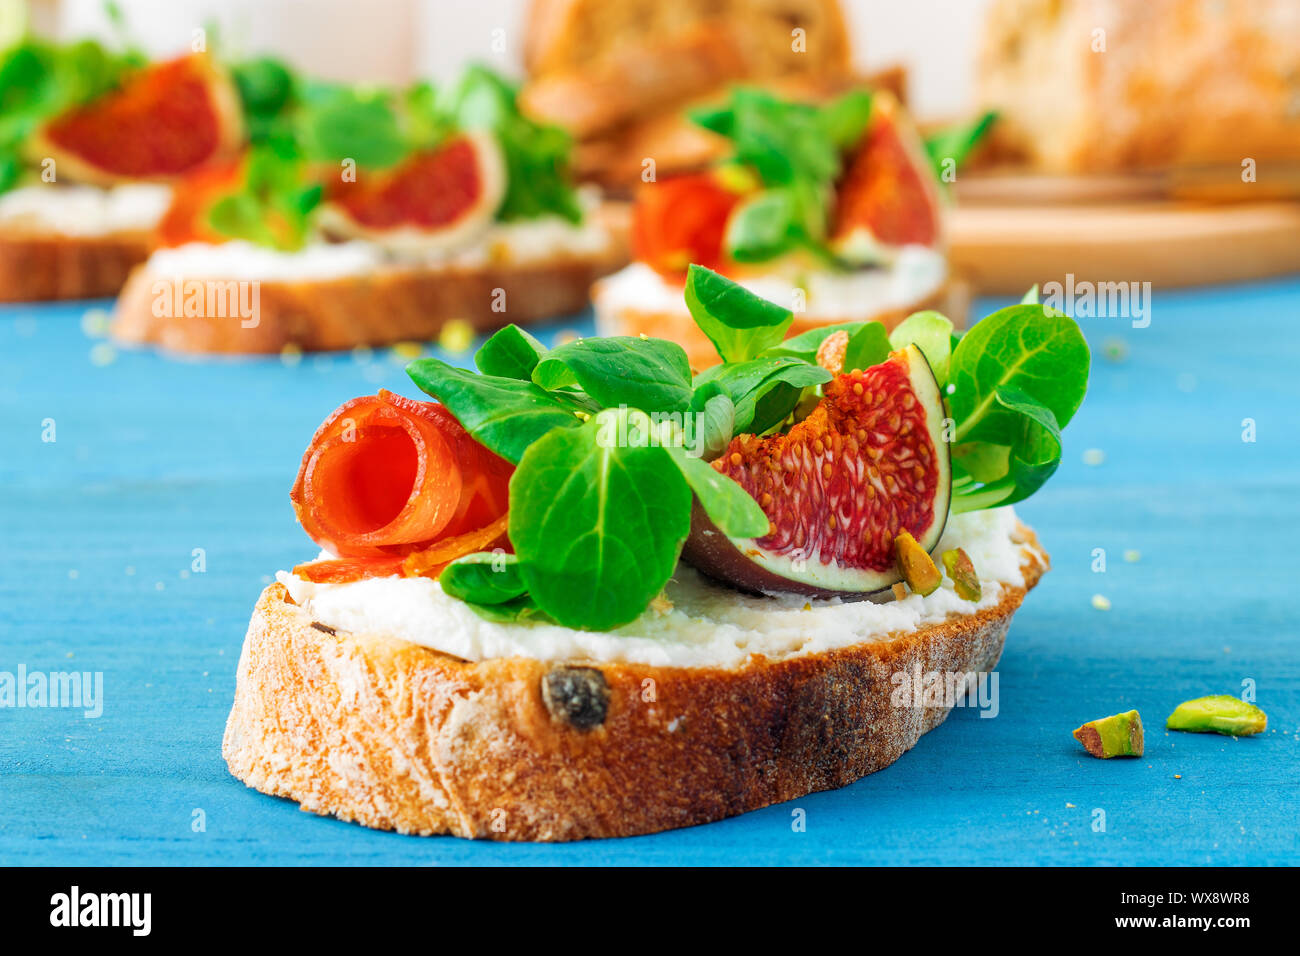 Toast from swiss twisted bread, with feta cheese or ricotta, fresh figs, rolled slice of bacon, fresh leaves of corn or valerian salad and crushed pis Stock Photo